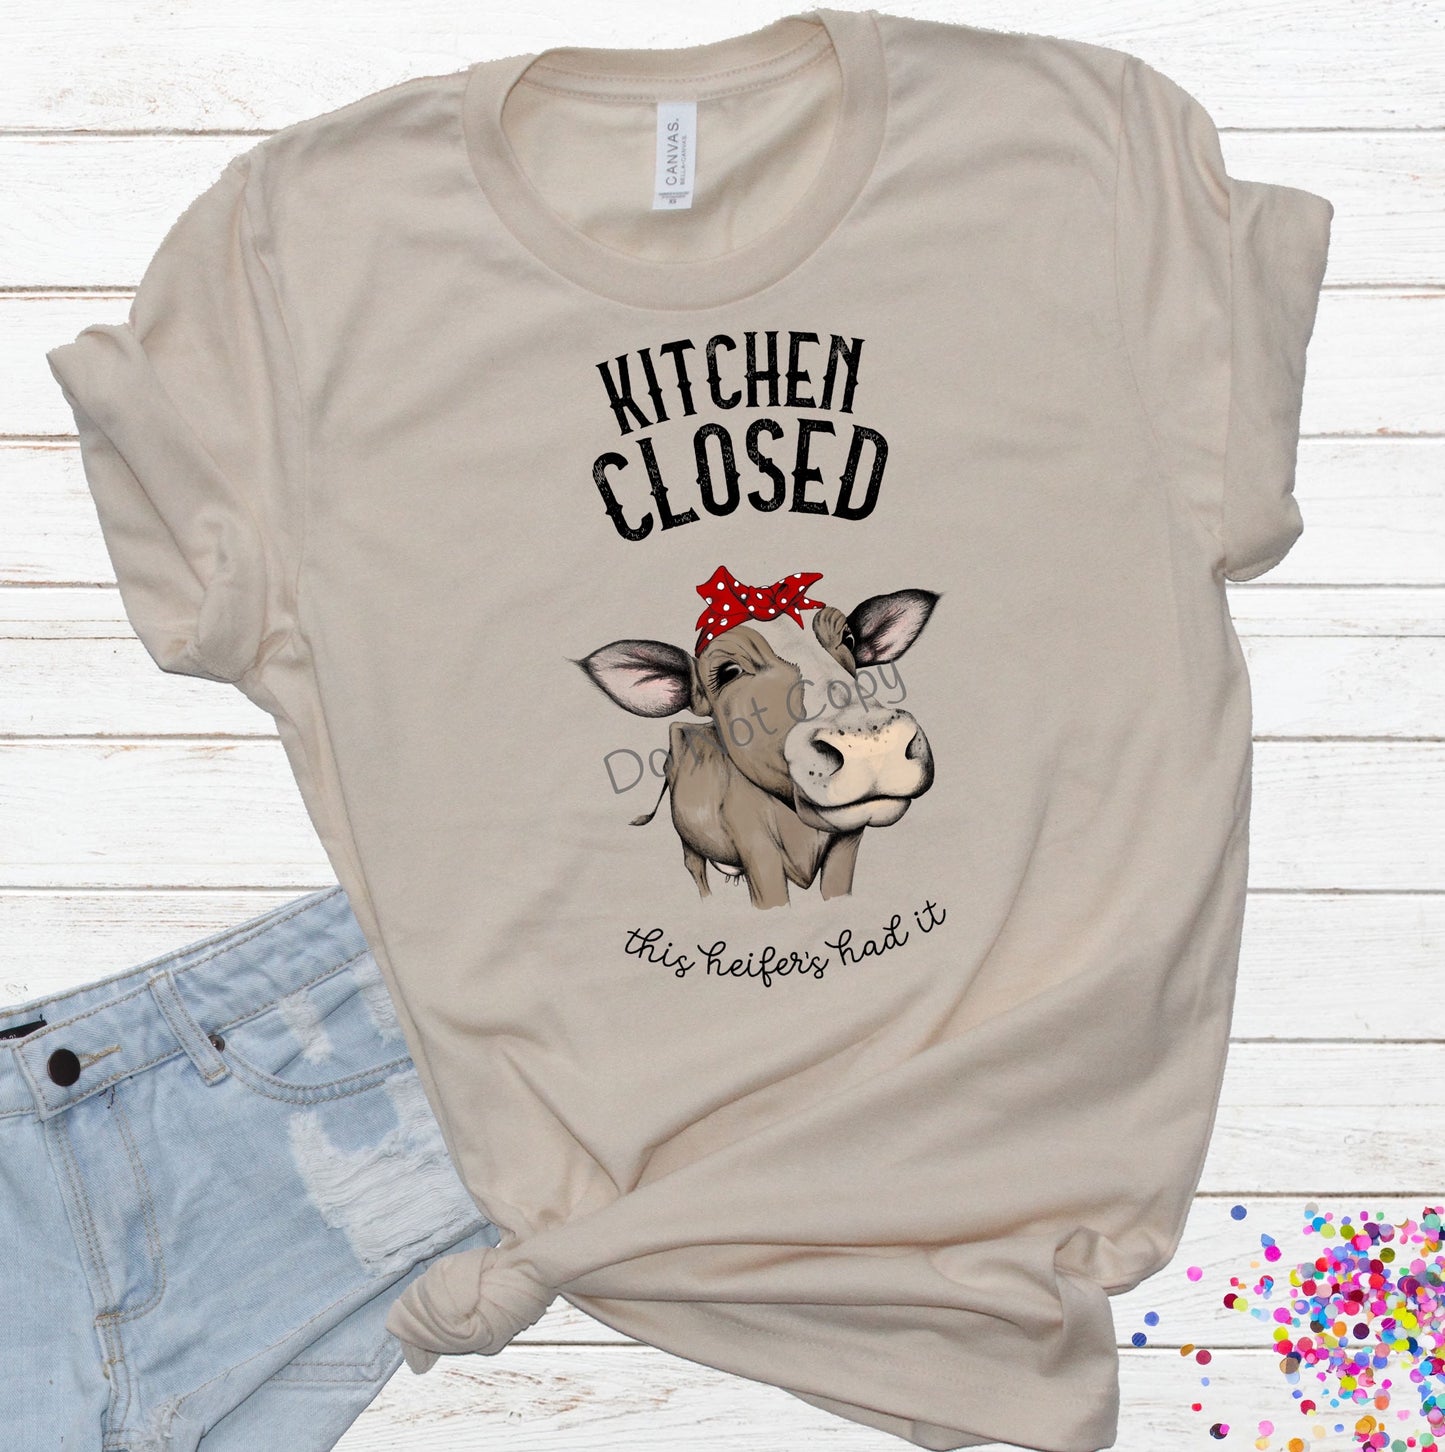 Kitchen closed this heifers had it -DTF